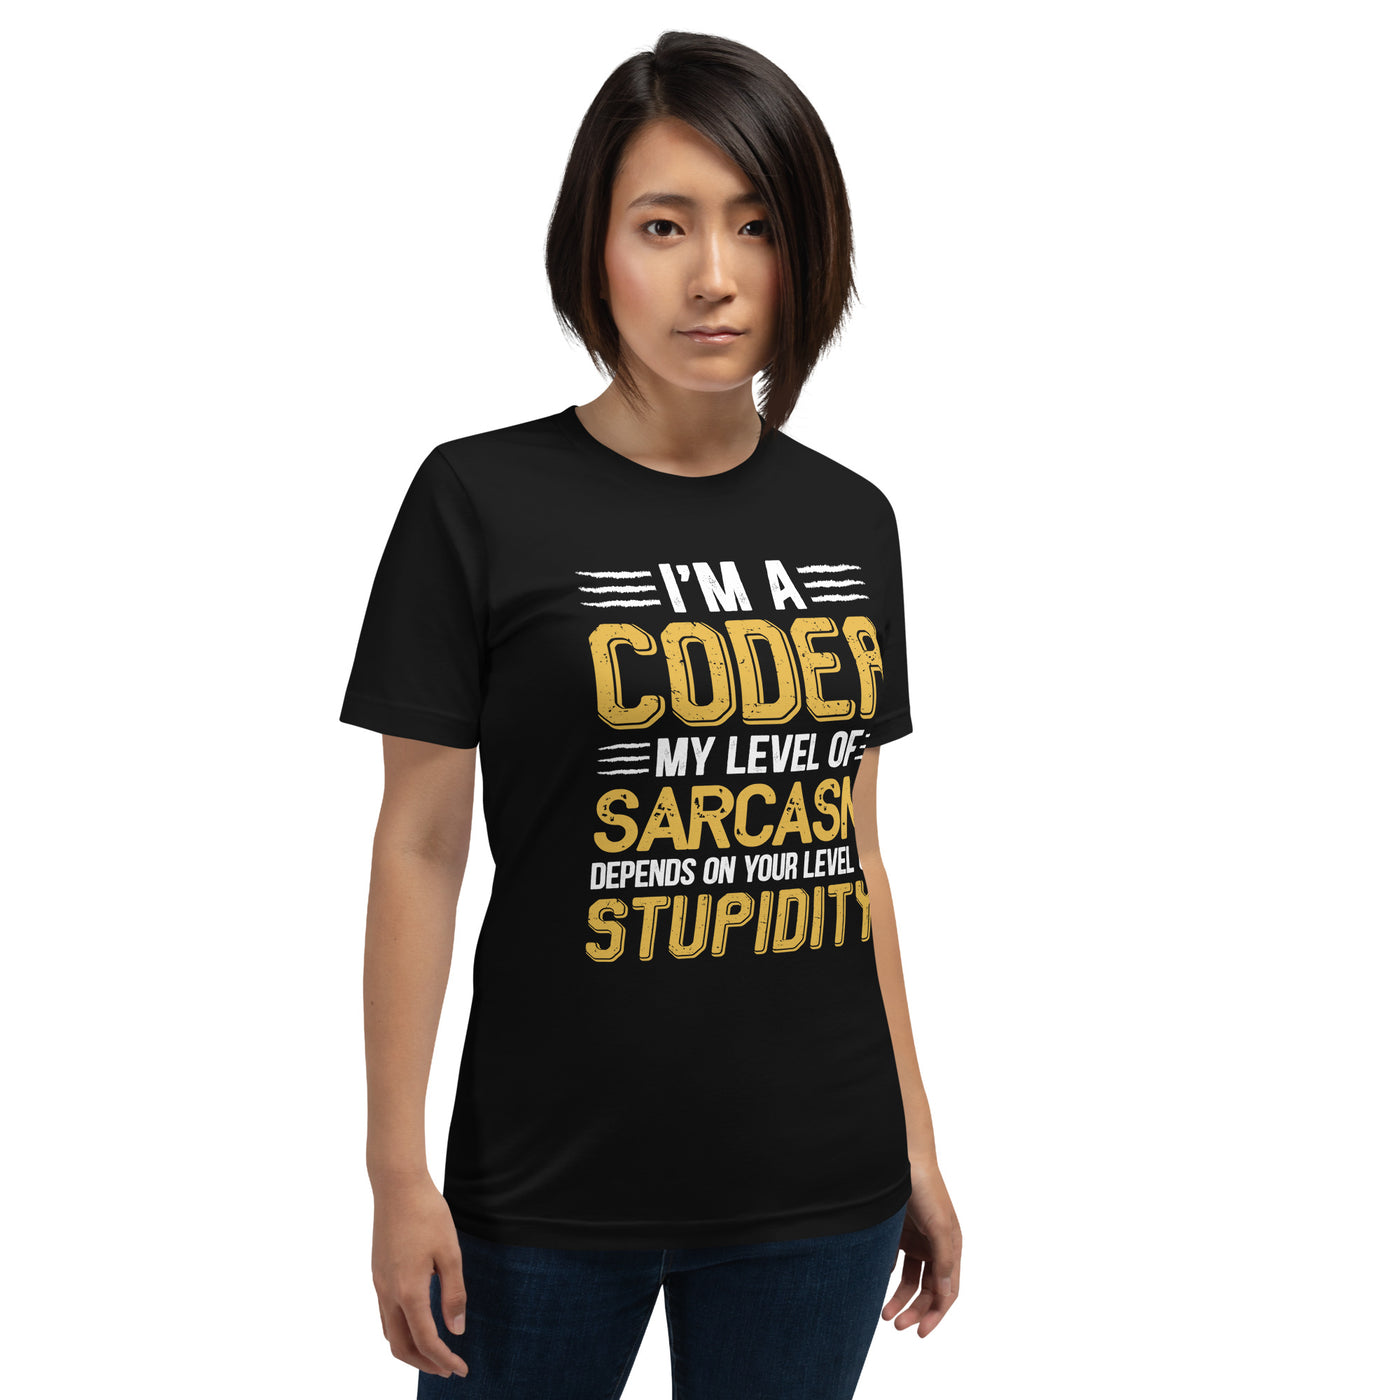 I am a Coder; my level of Sarcasm Depends on your level of Stupidity - Unisex t-shirt